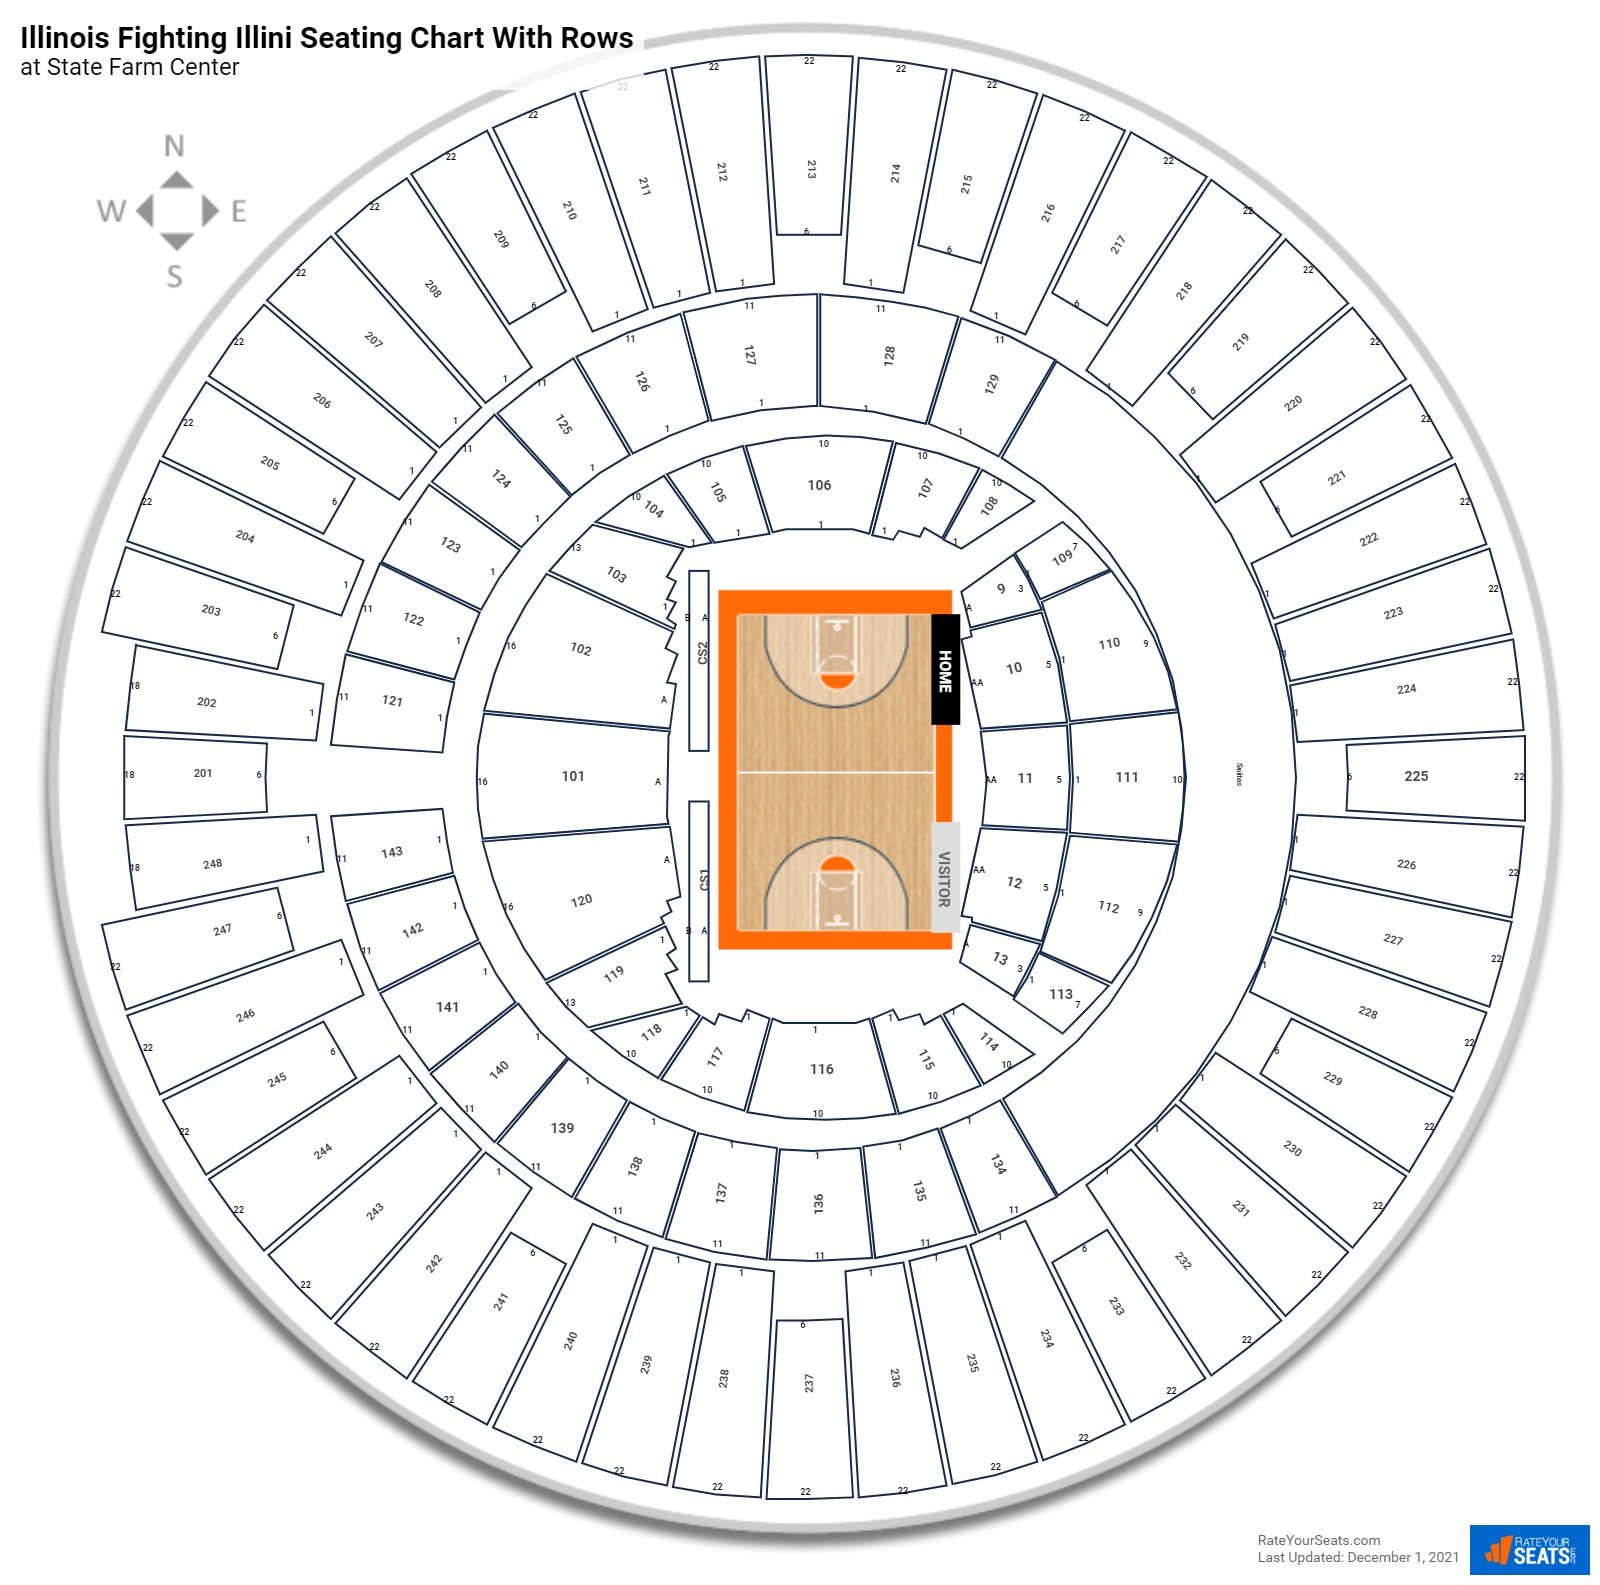 State Farm Center seating chart with row numbers